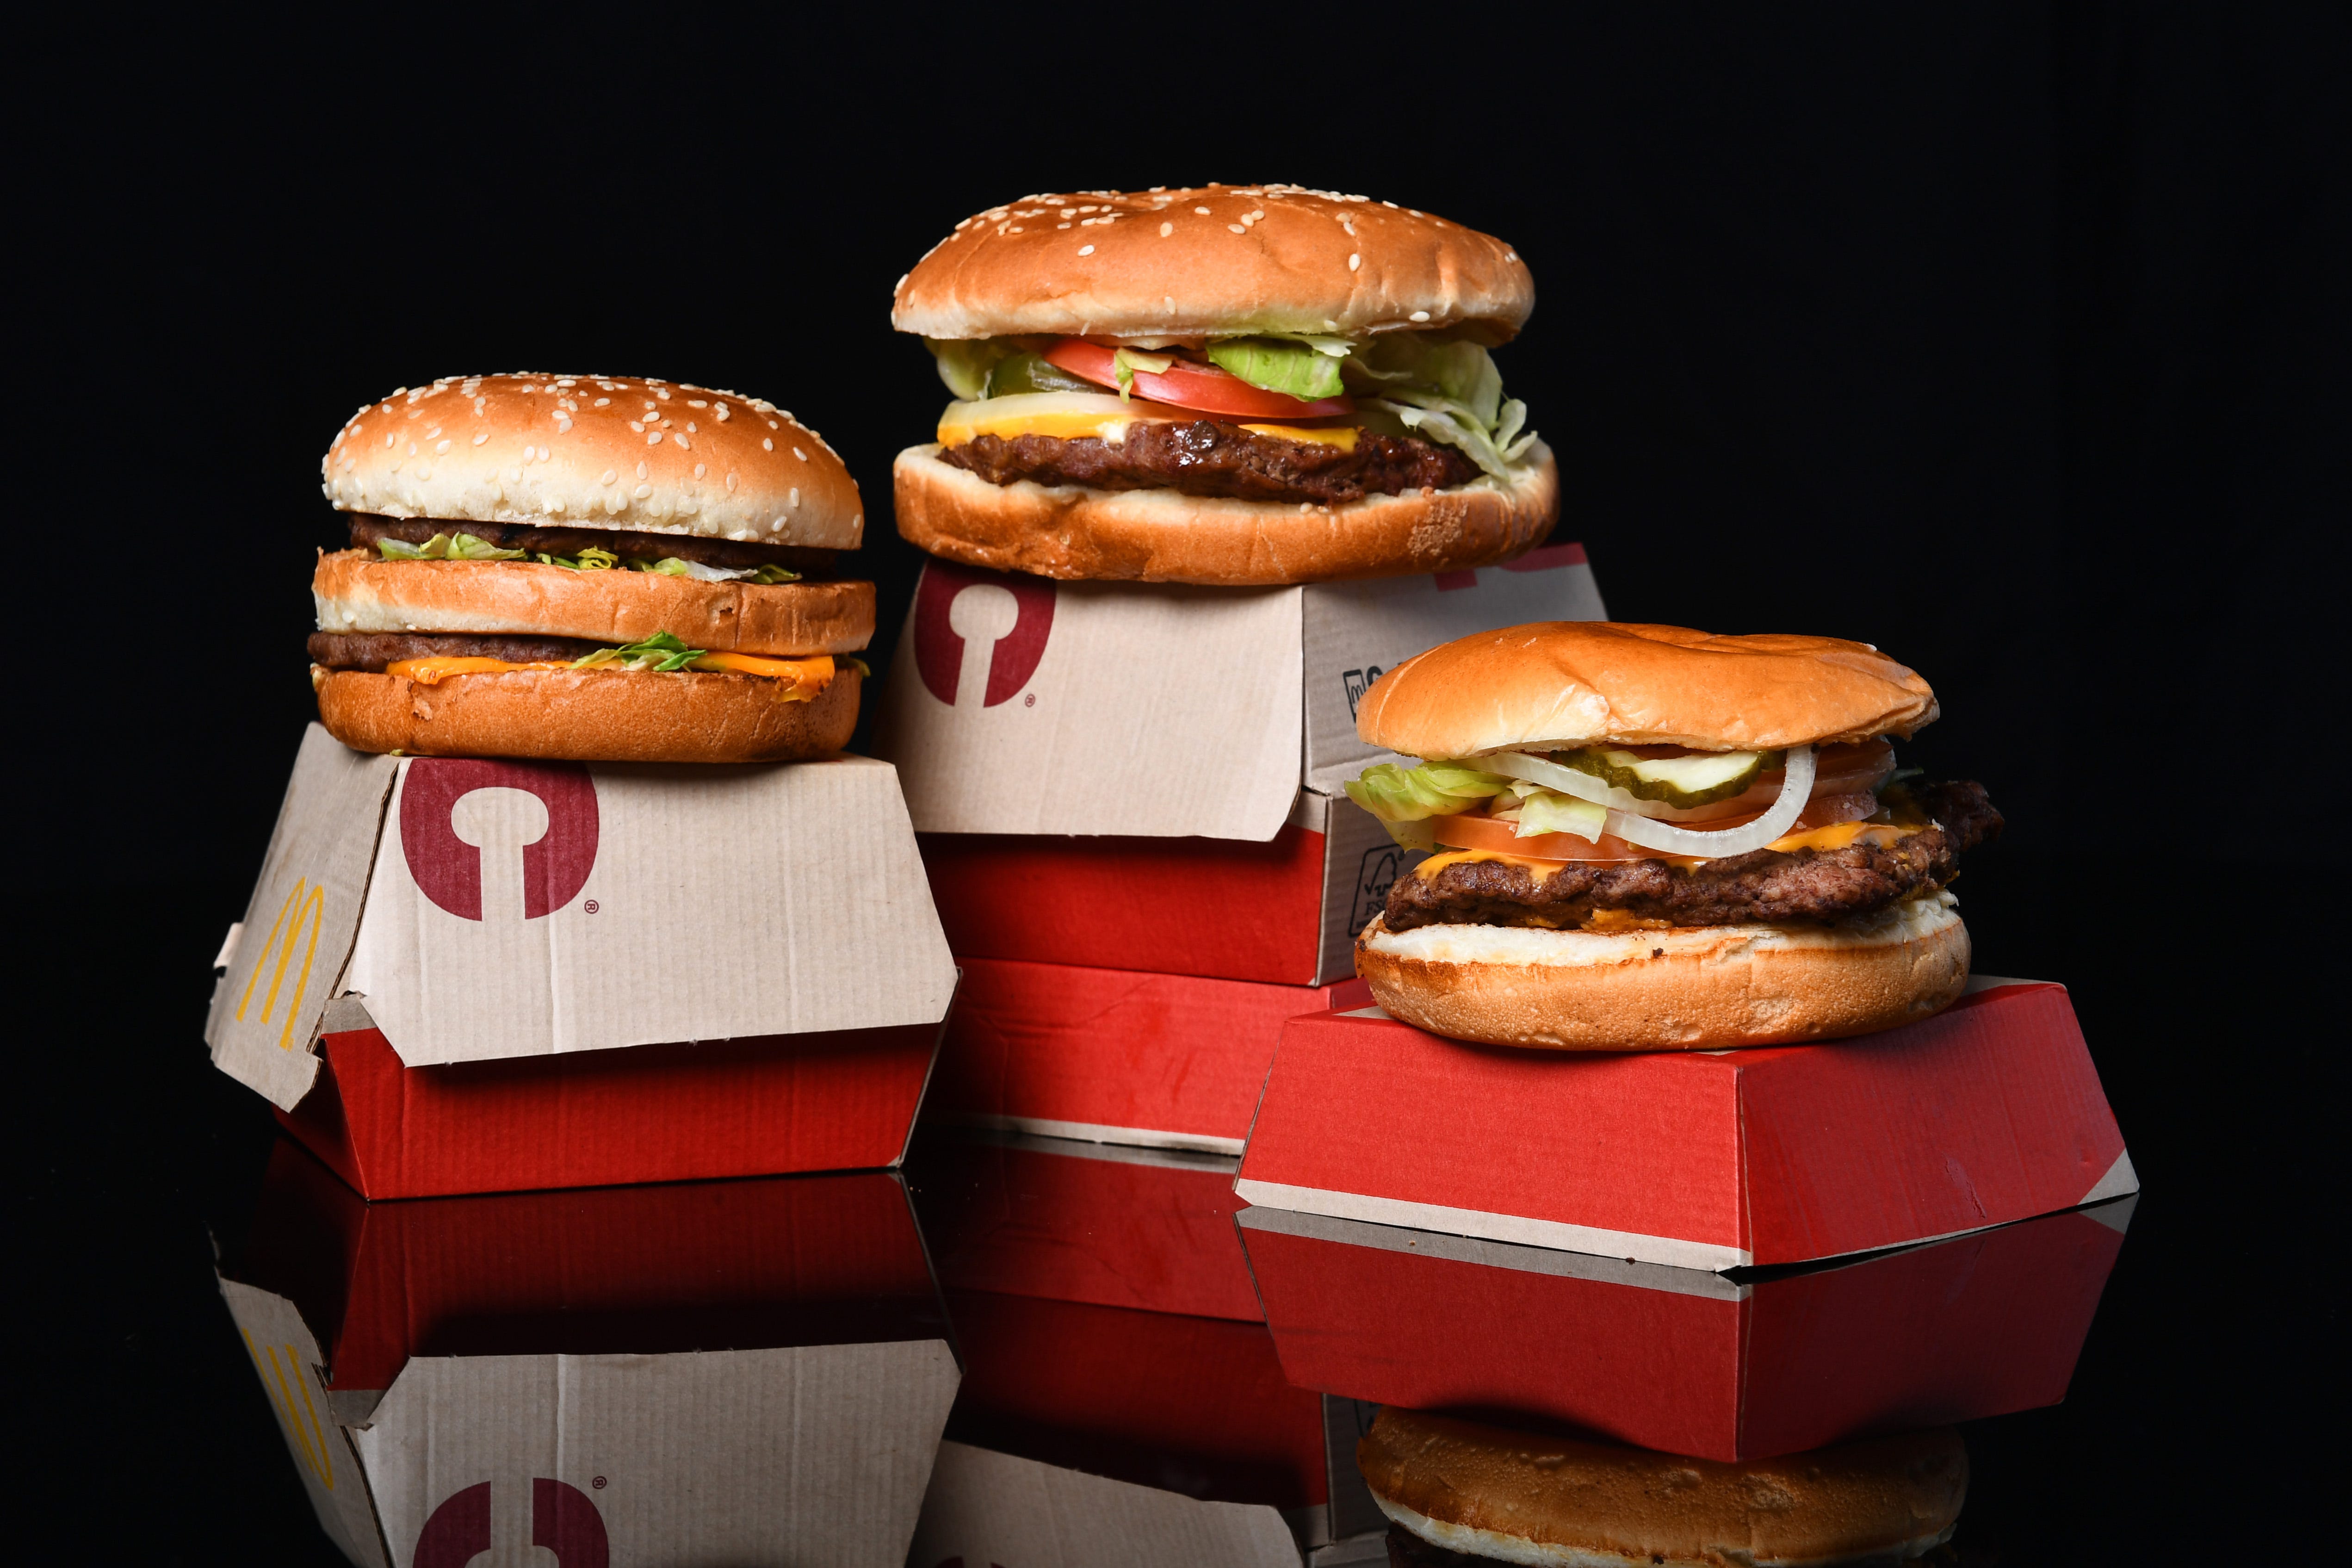 Big Mac, Whopper and Dave's Single share the major flaw